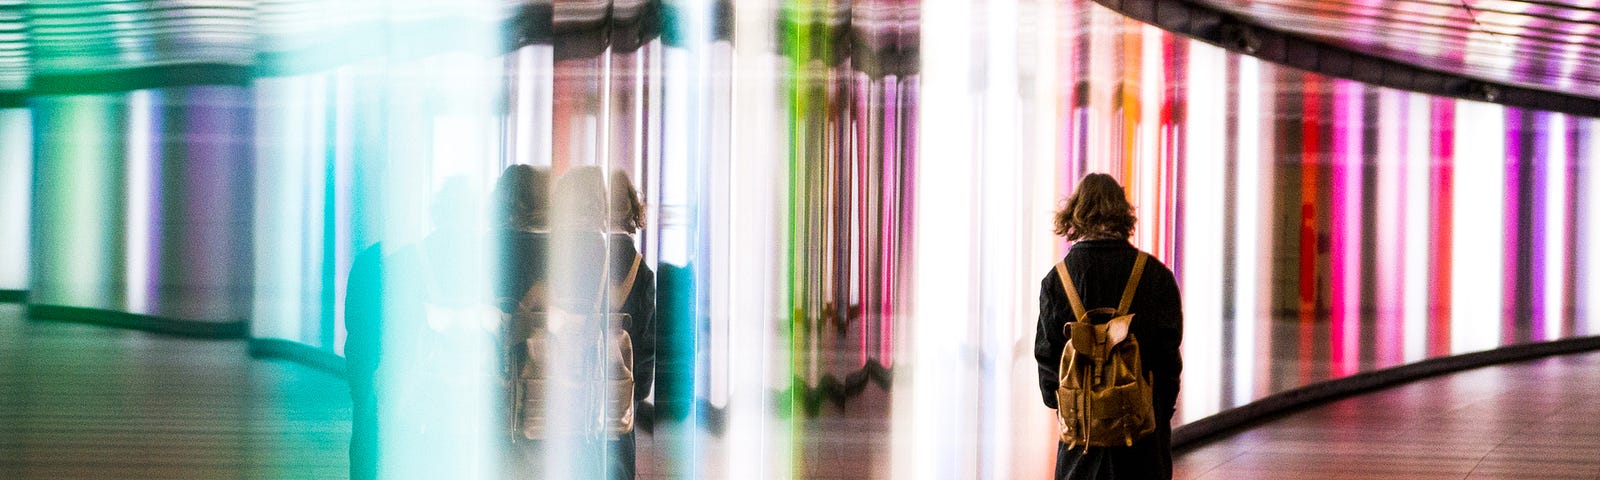 A photo of a woman with a backpack on walking through a bright rainbow-lit curved hallway.